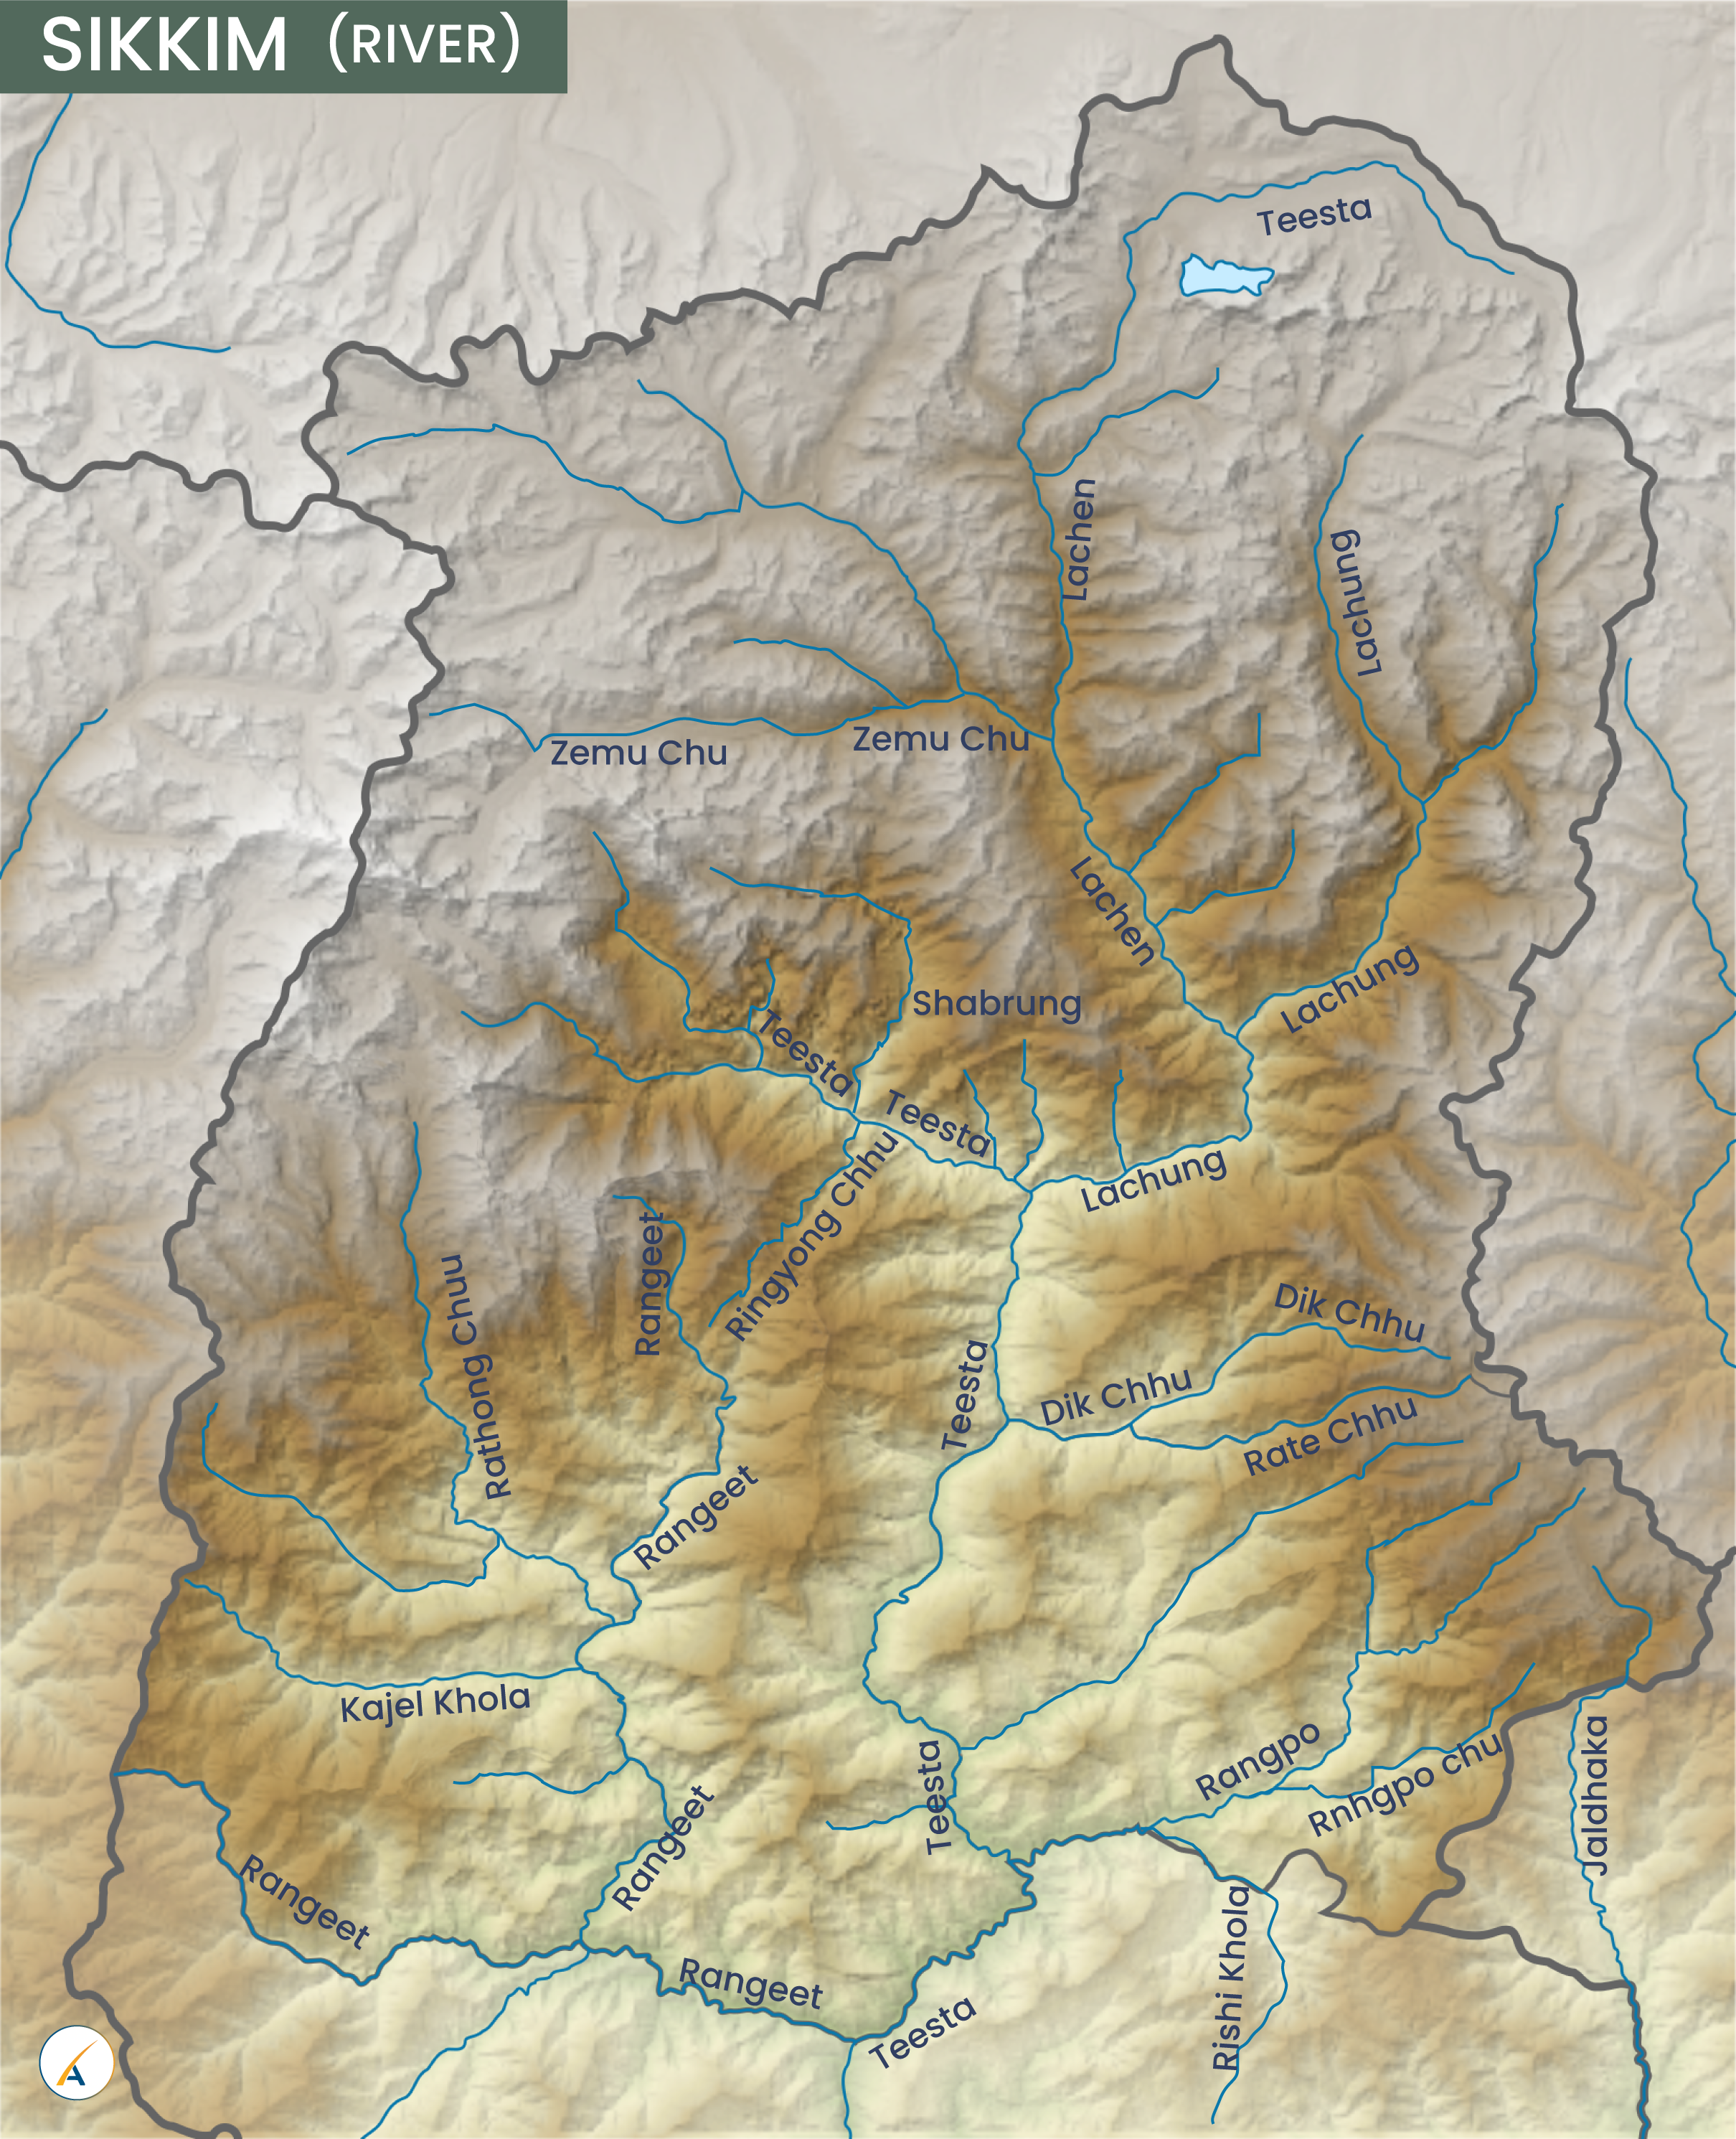 Sikkim River Map